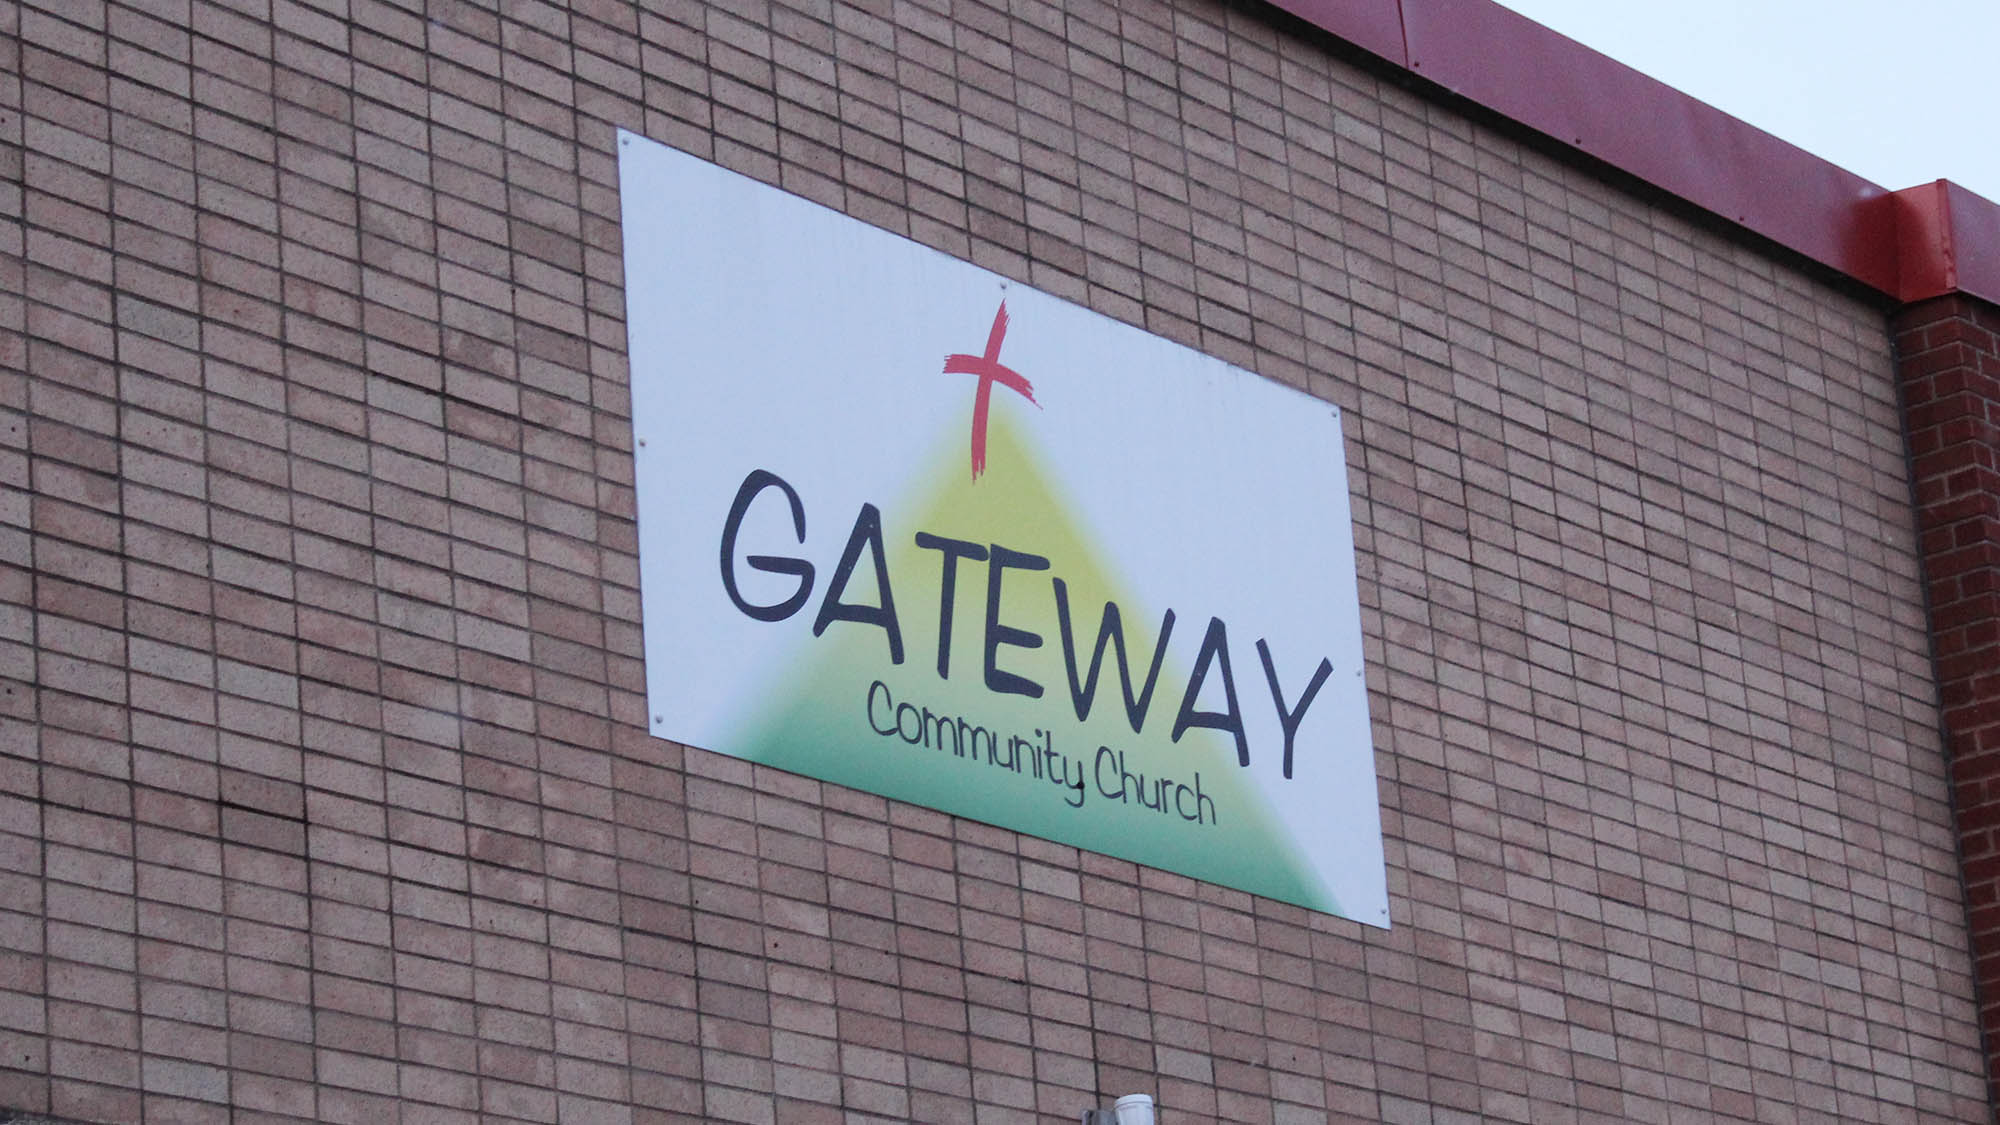 Gateway Community Church will be the location of a new warming centre in Lower Sackville.